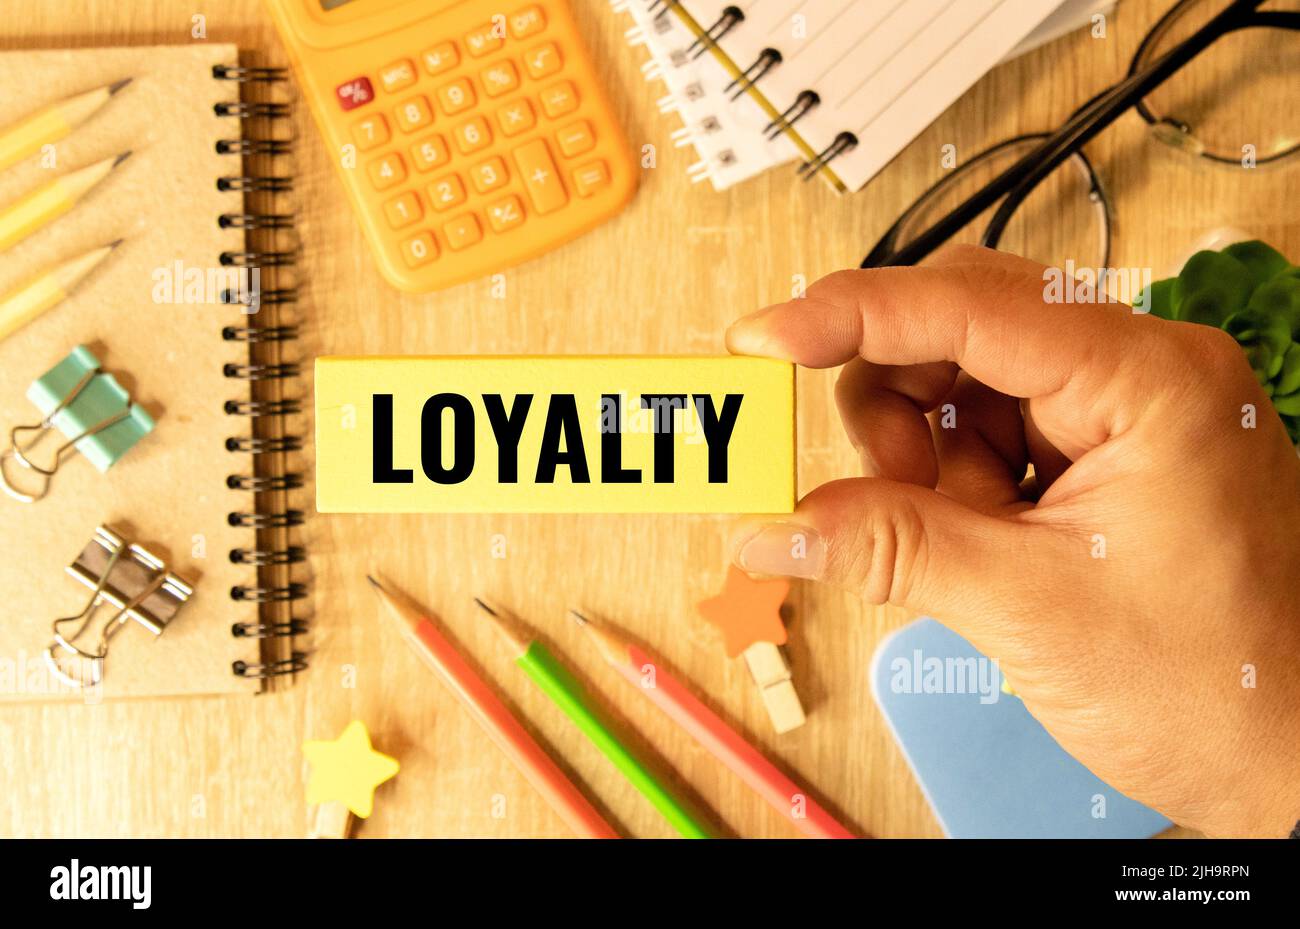 LOYALTY wood word on compressed board with human's finger at Y letter Stock Photo